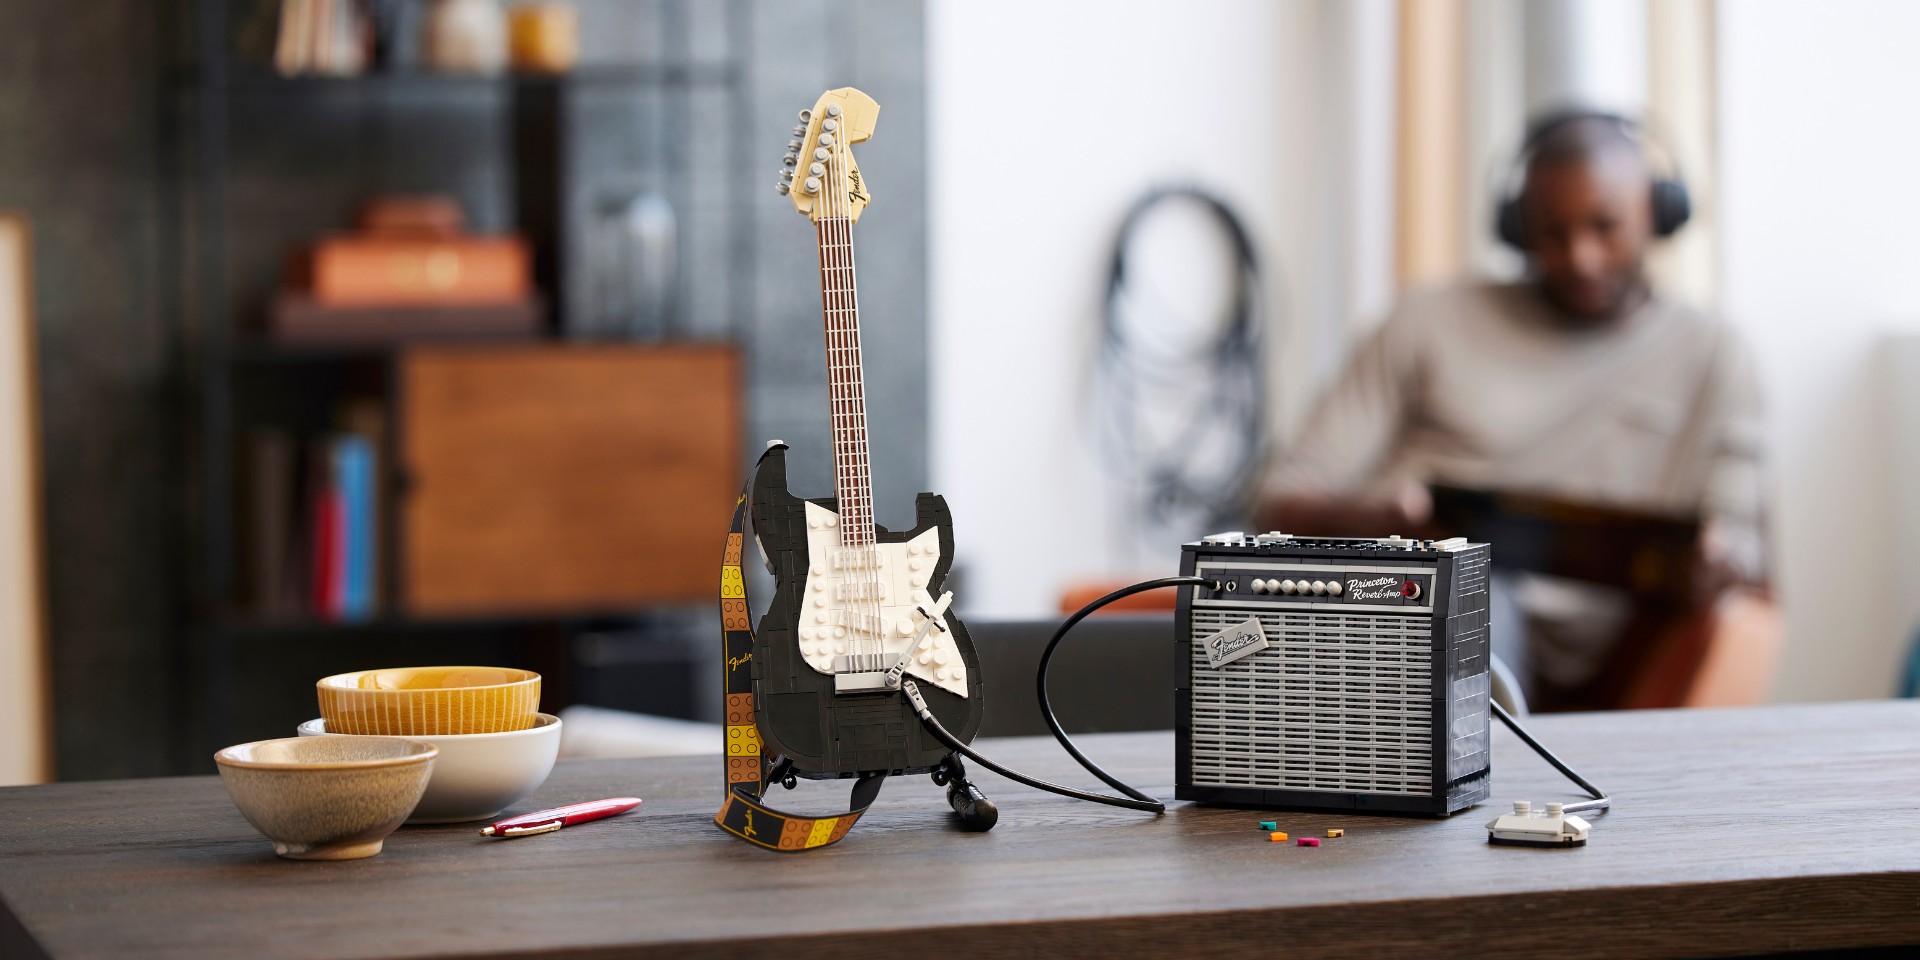 Rock out with the new LEGO Ideas Fender Stratocaster set designed by Tomáš Letenay